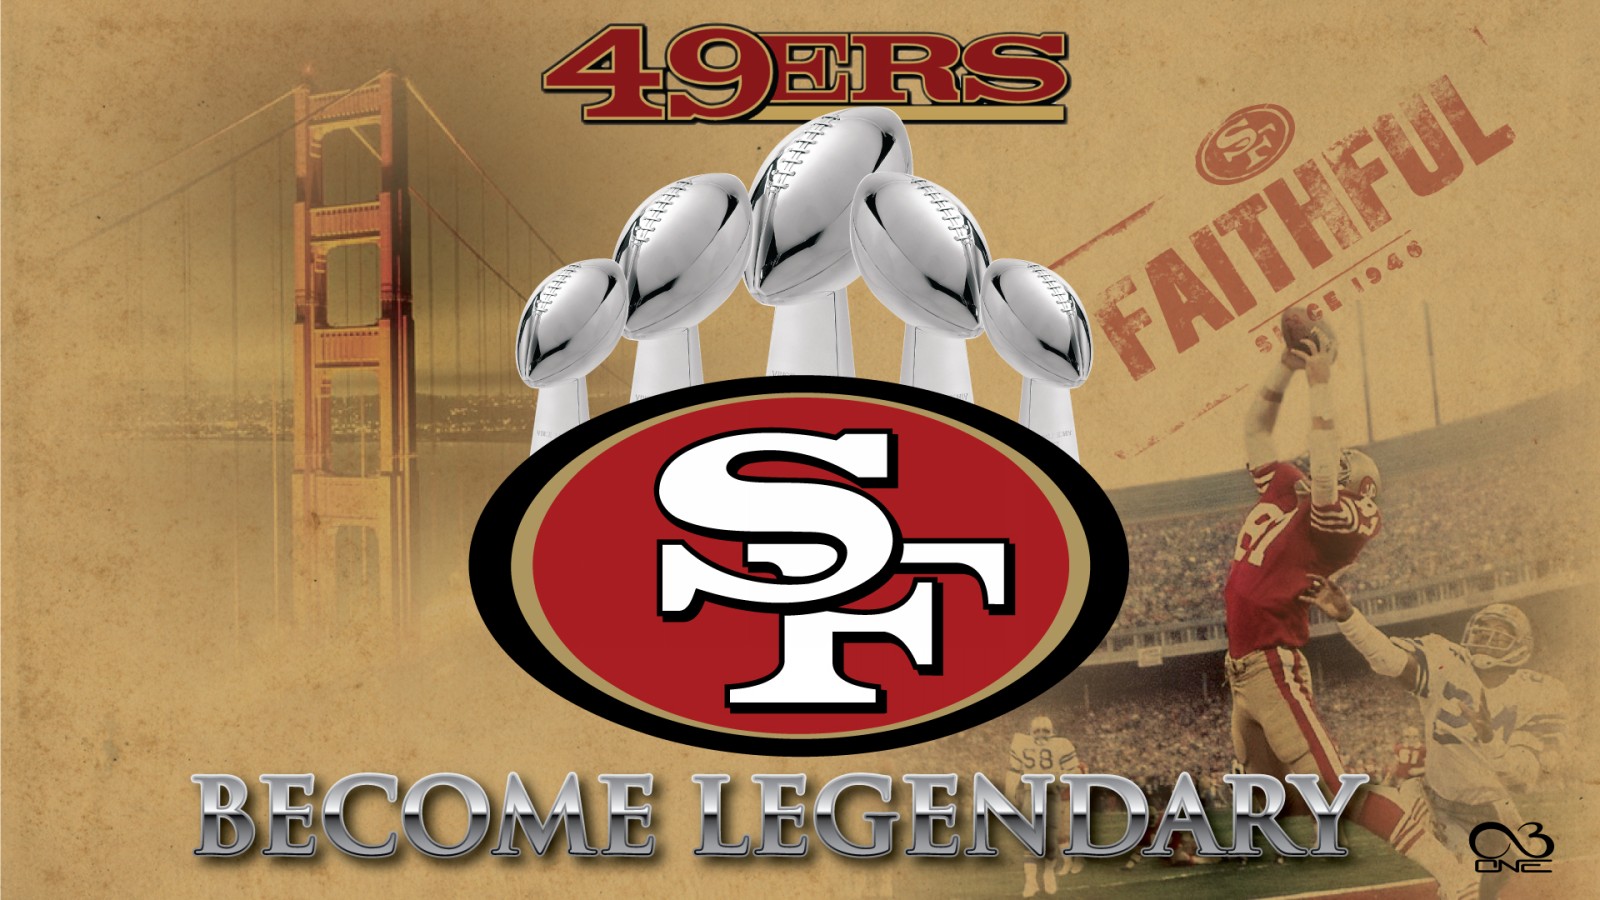 And Here Even Rmation About San Francisco 49ers